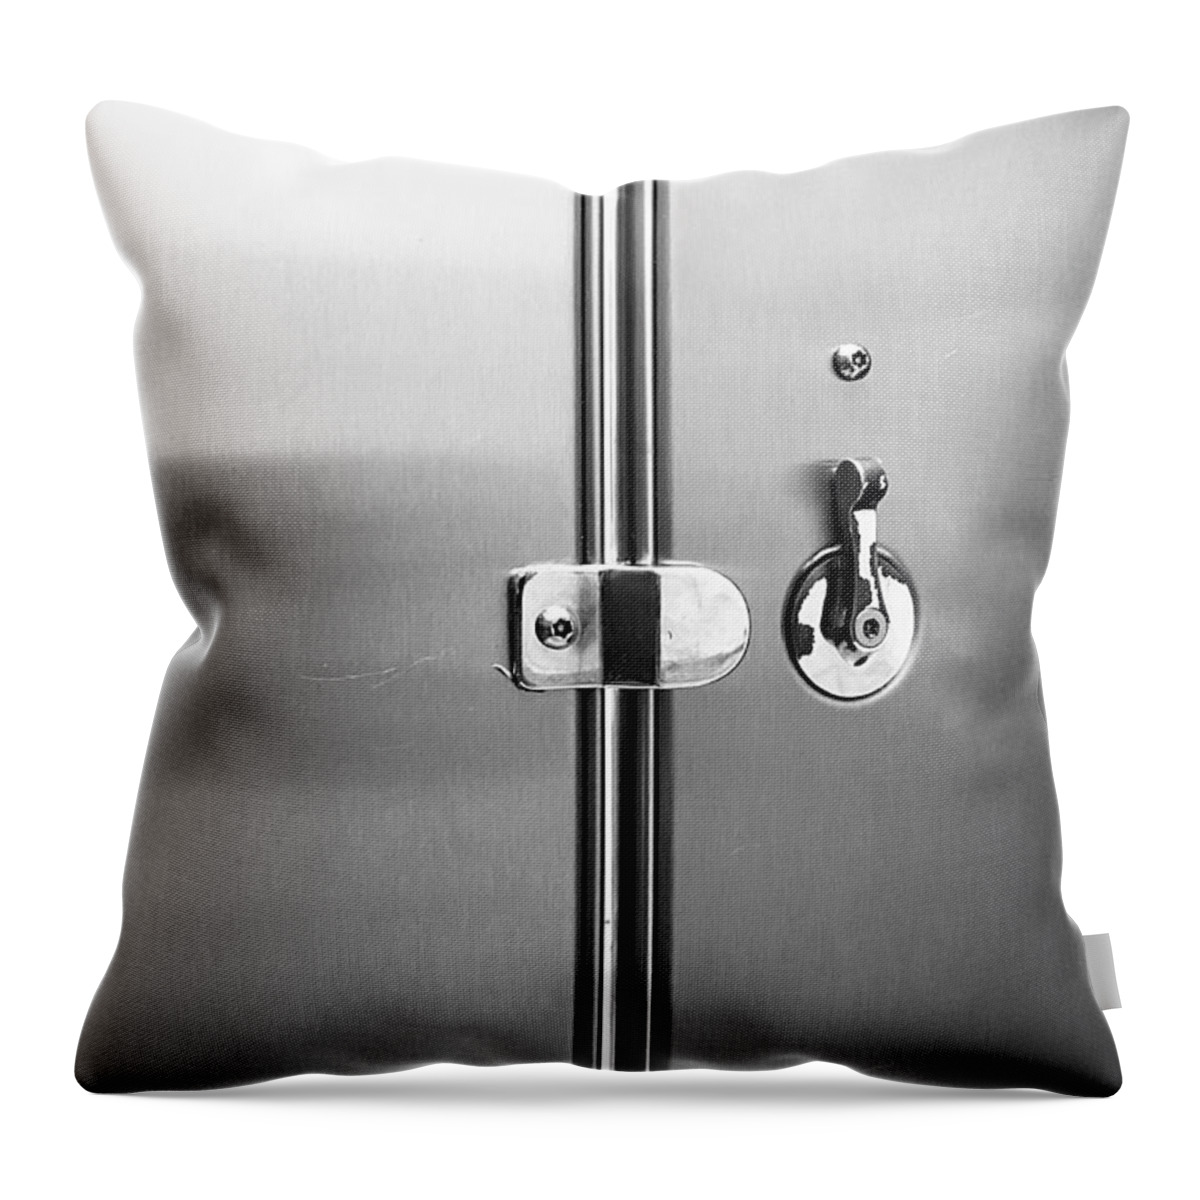 Richard Reeve Throw Pillow featuring the photograph Stall by Richard Reeve